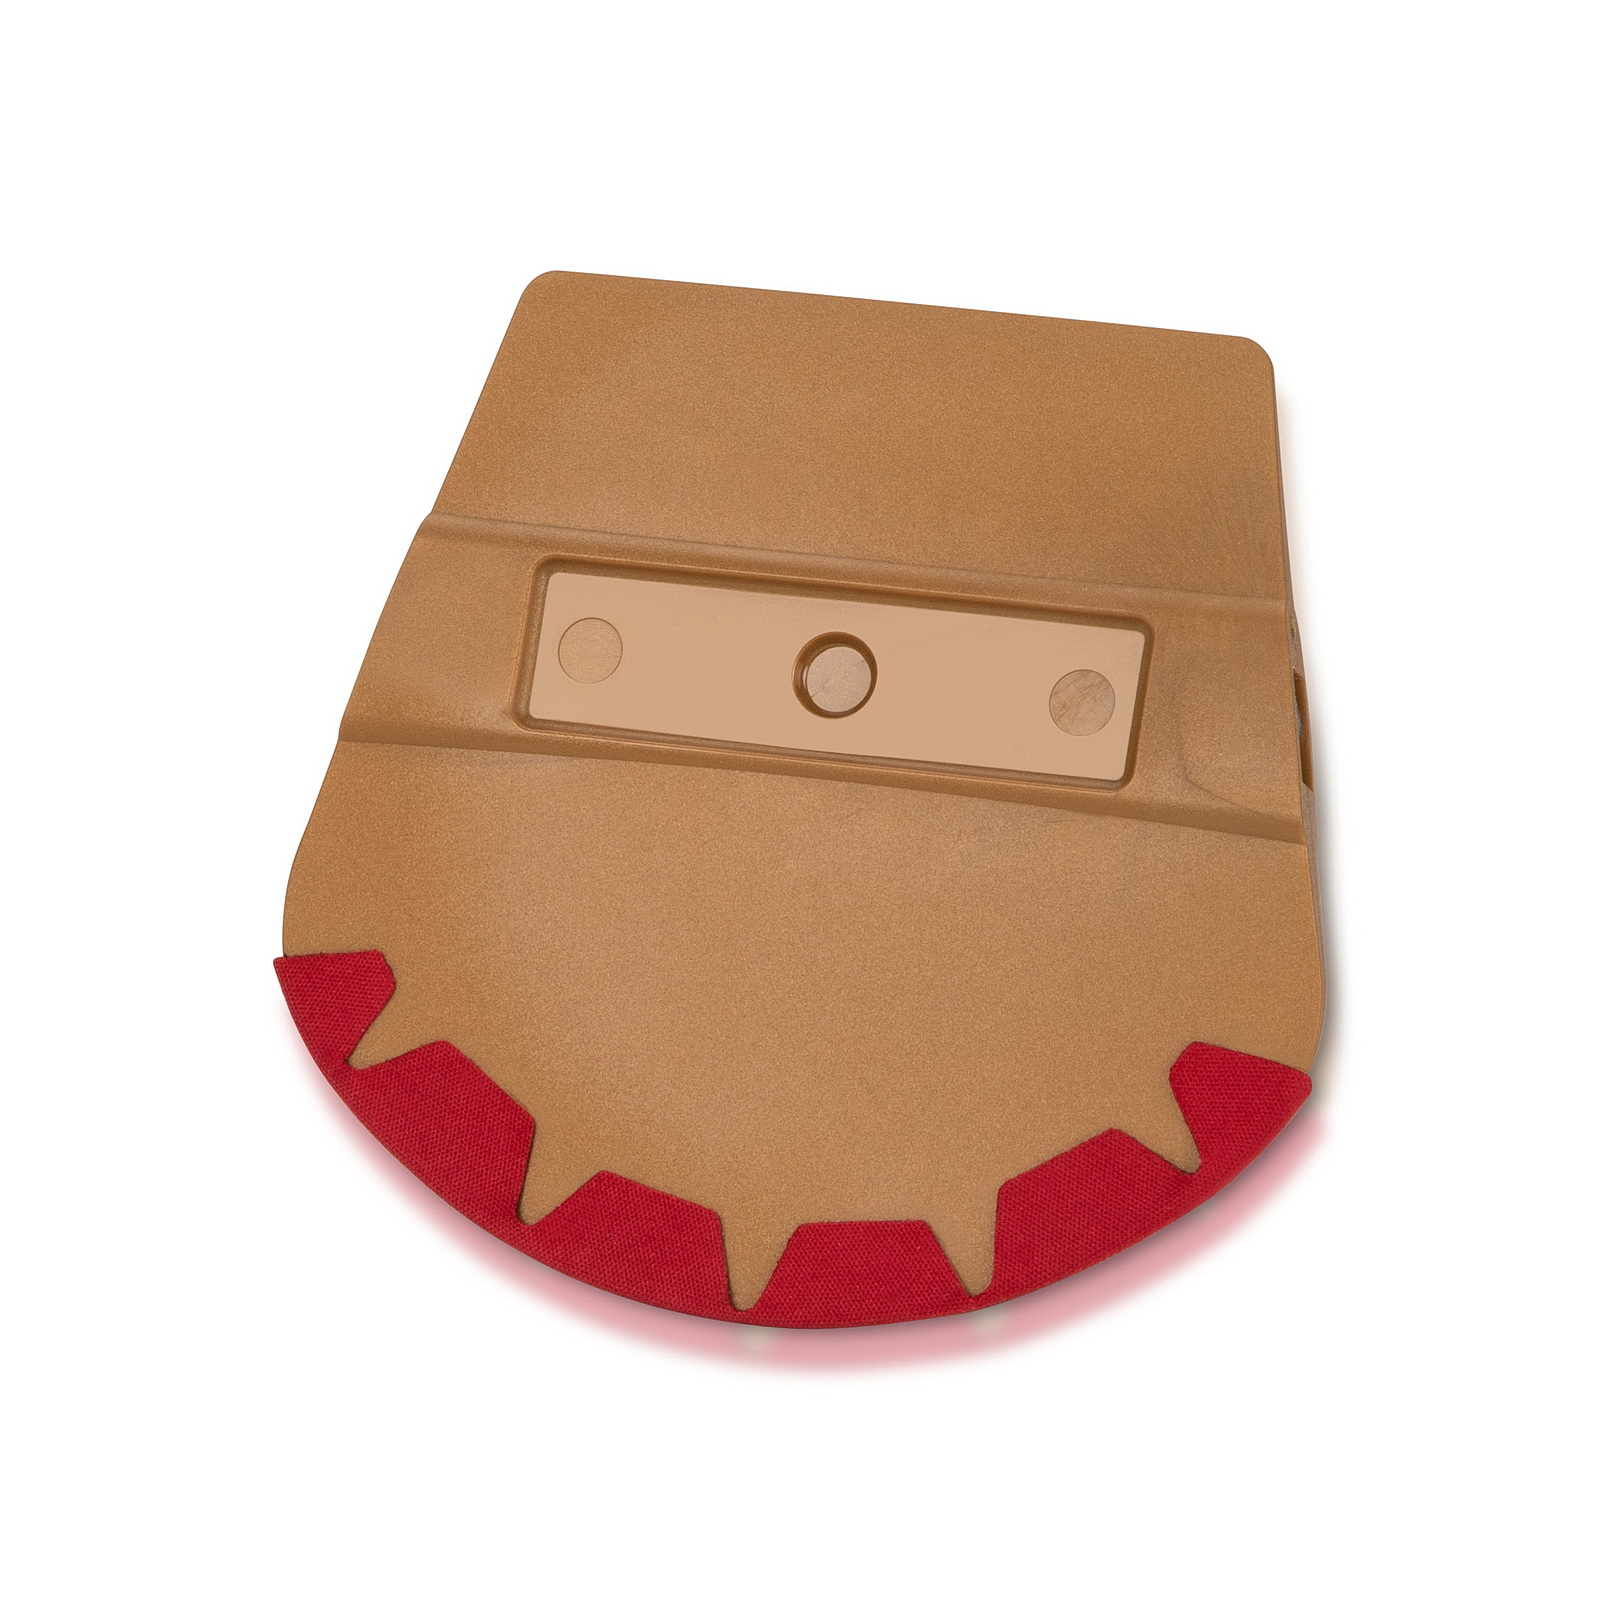 6'' x 2-1/2'' Gold Trapezoid Magnetic Squeegee, Medium Hardness with Red Felt for Film and Vinyl Application